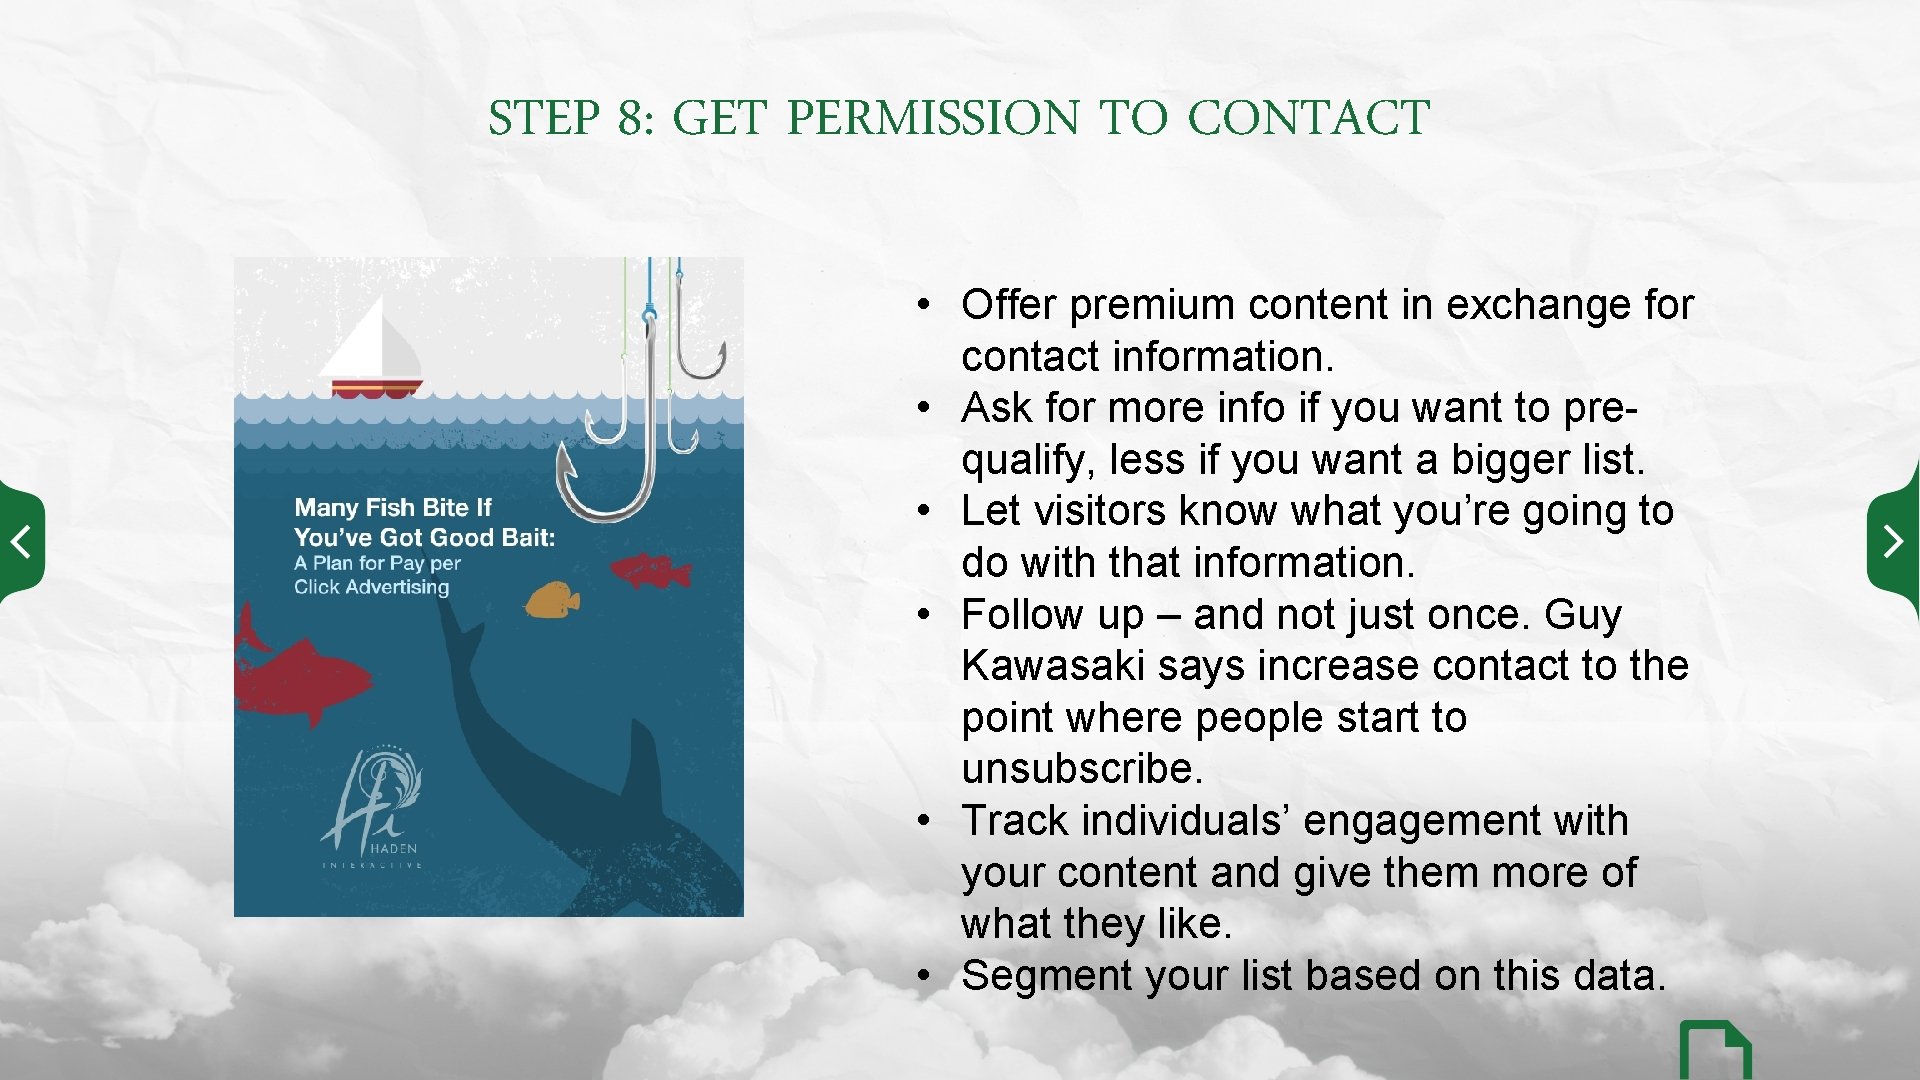 STEP 8: GET PERMISSION TO CONTACT • Offer premium content in exchange for contact